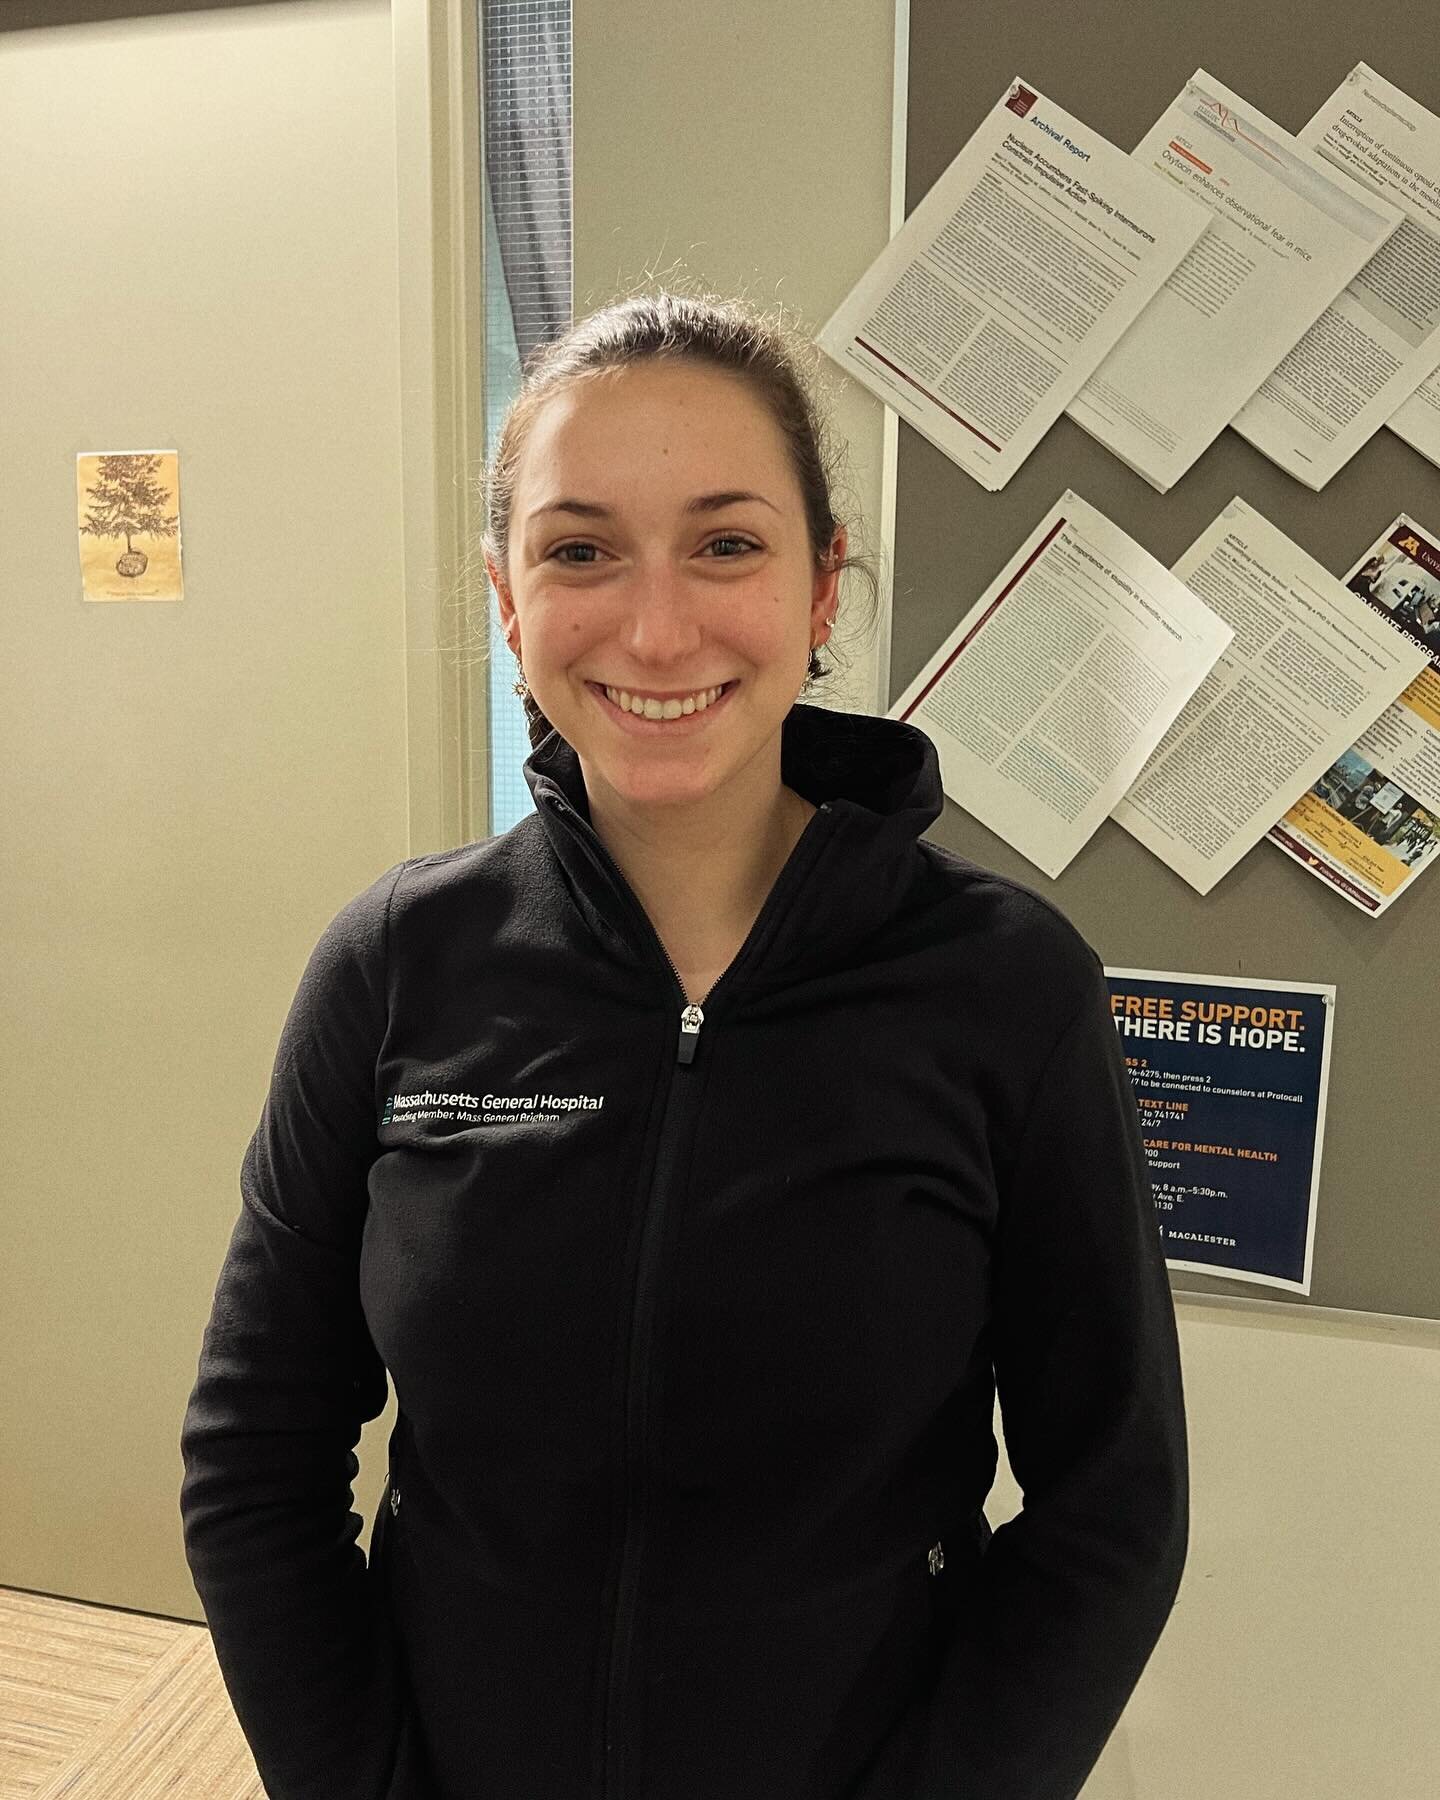 Please congratulate TRG lab member, Carly Steifman @carly.steifman , on her new position as a research technician with the Yonker Lab at Mass General! 🥳🥳🥳